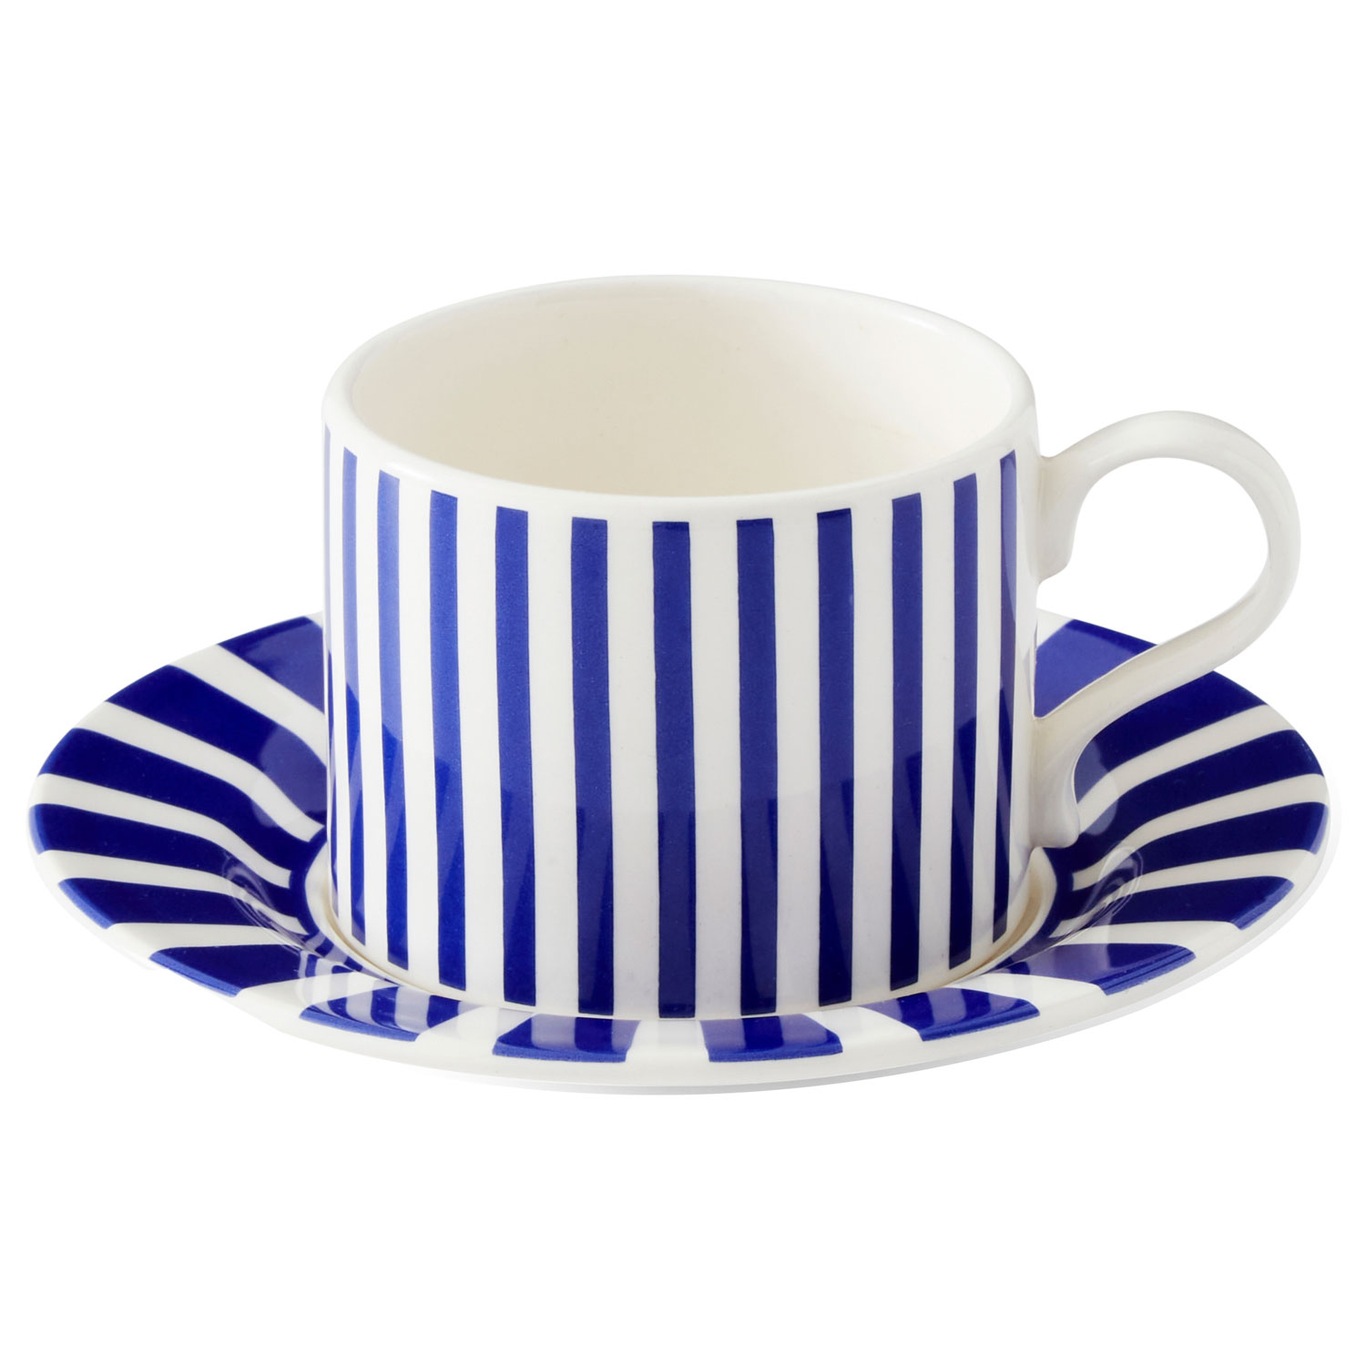 Steccato Teacup With Saucer, 29 cl